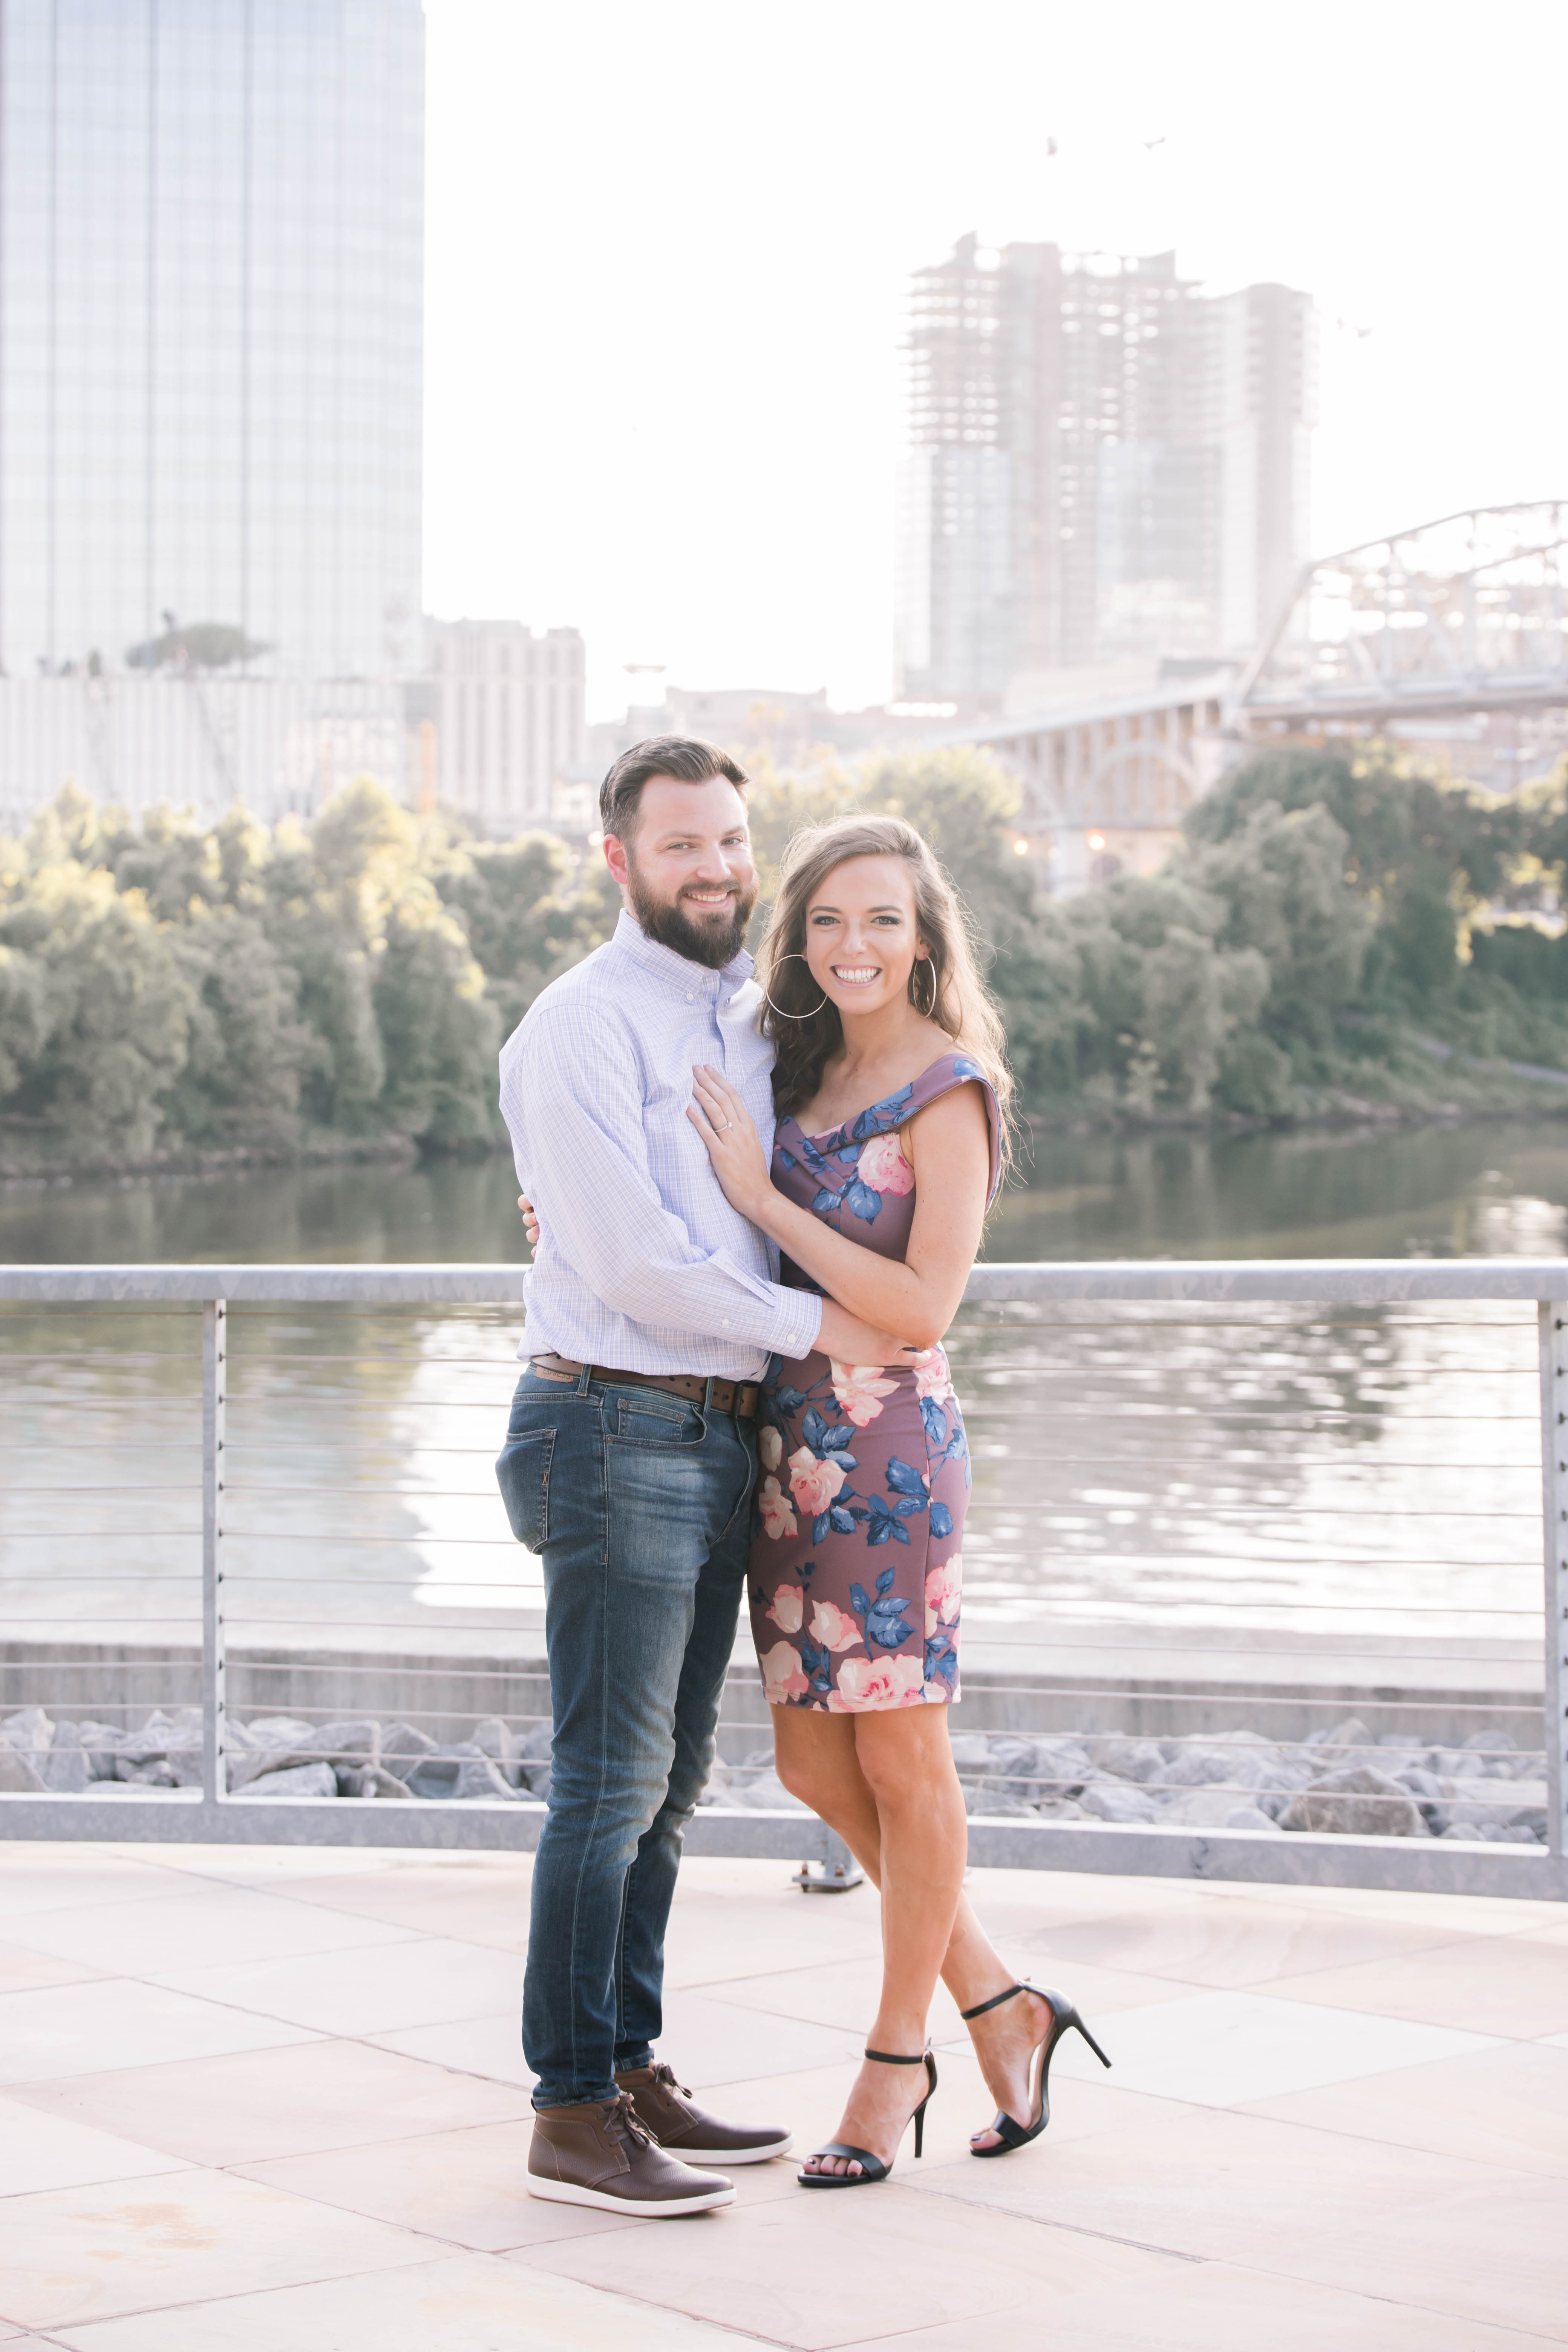 guy in jeans with beard and girl in purple dress posing